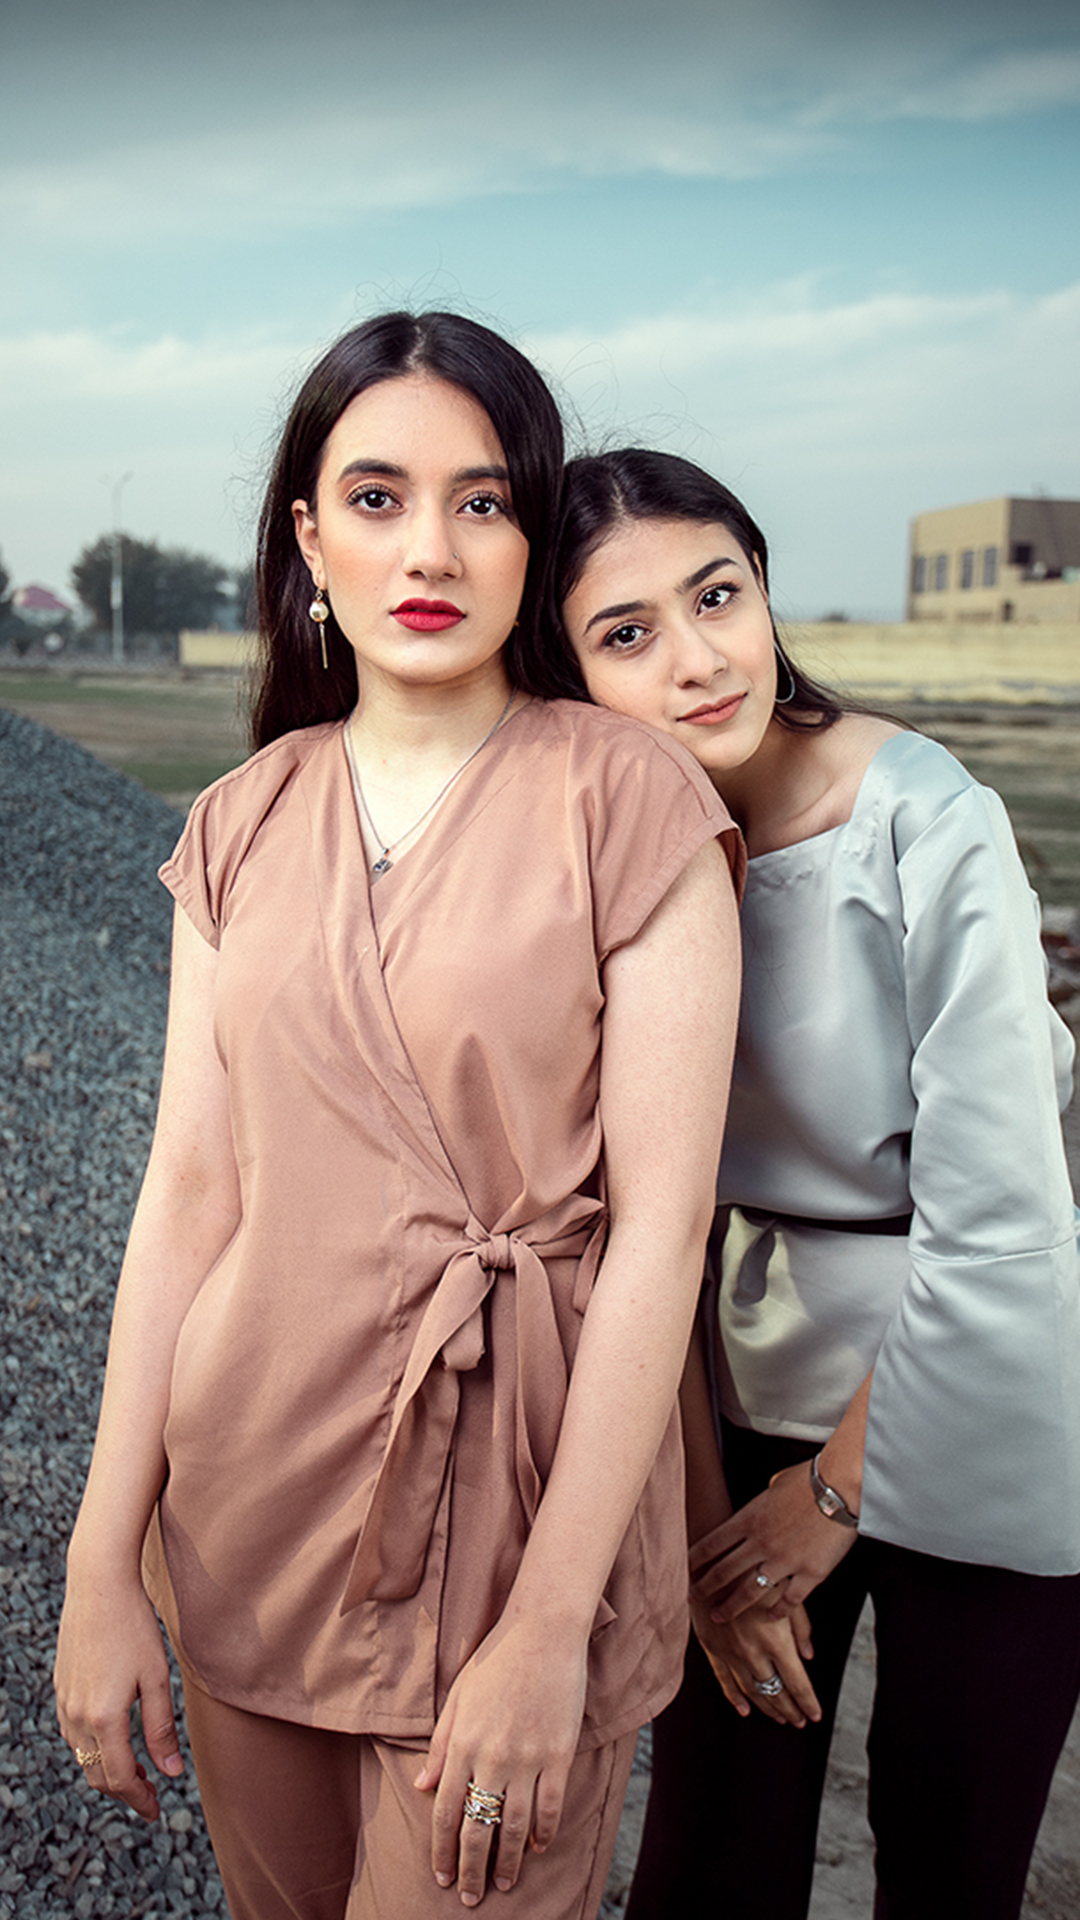 two girls wearing belted peplum blouses